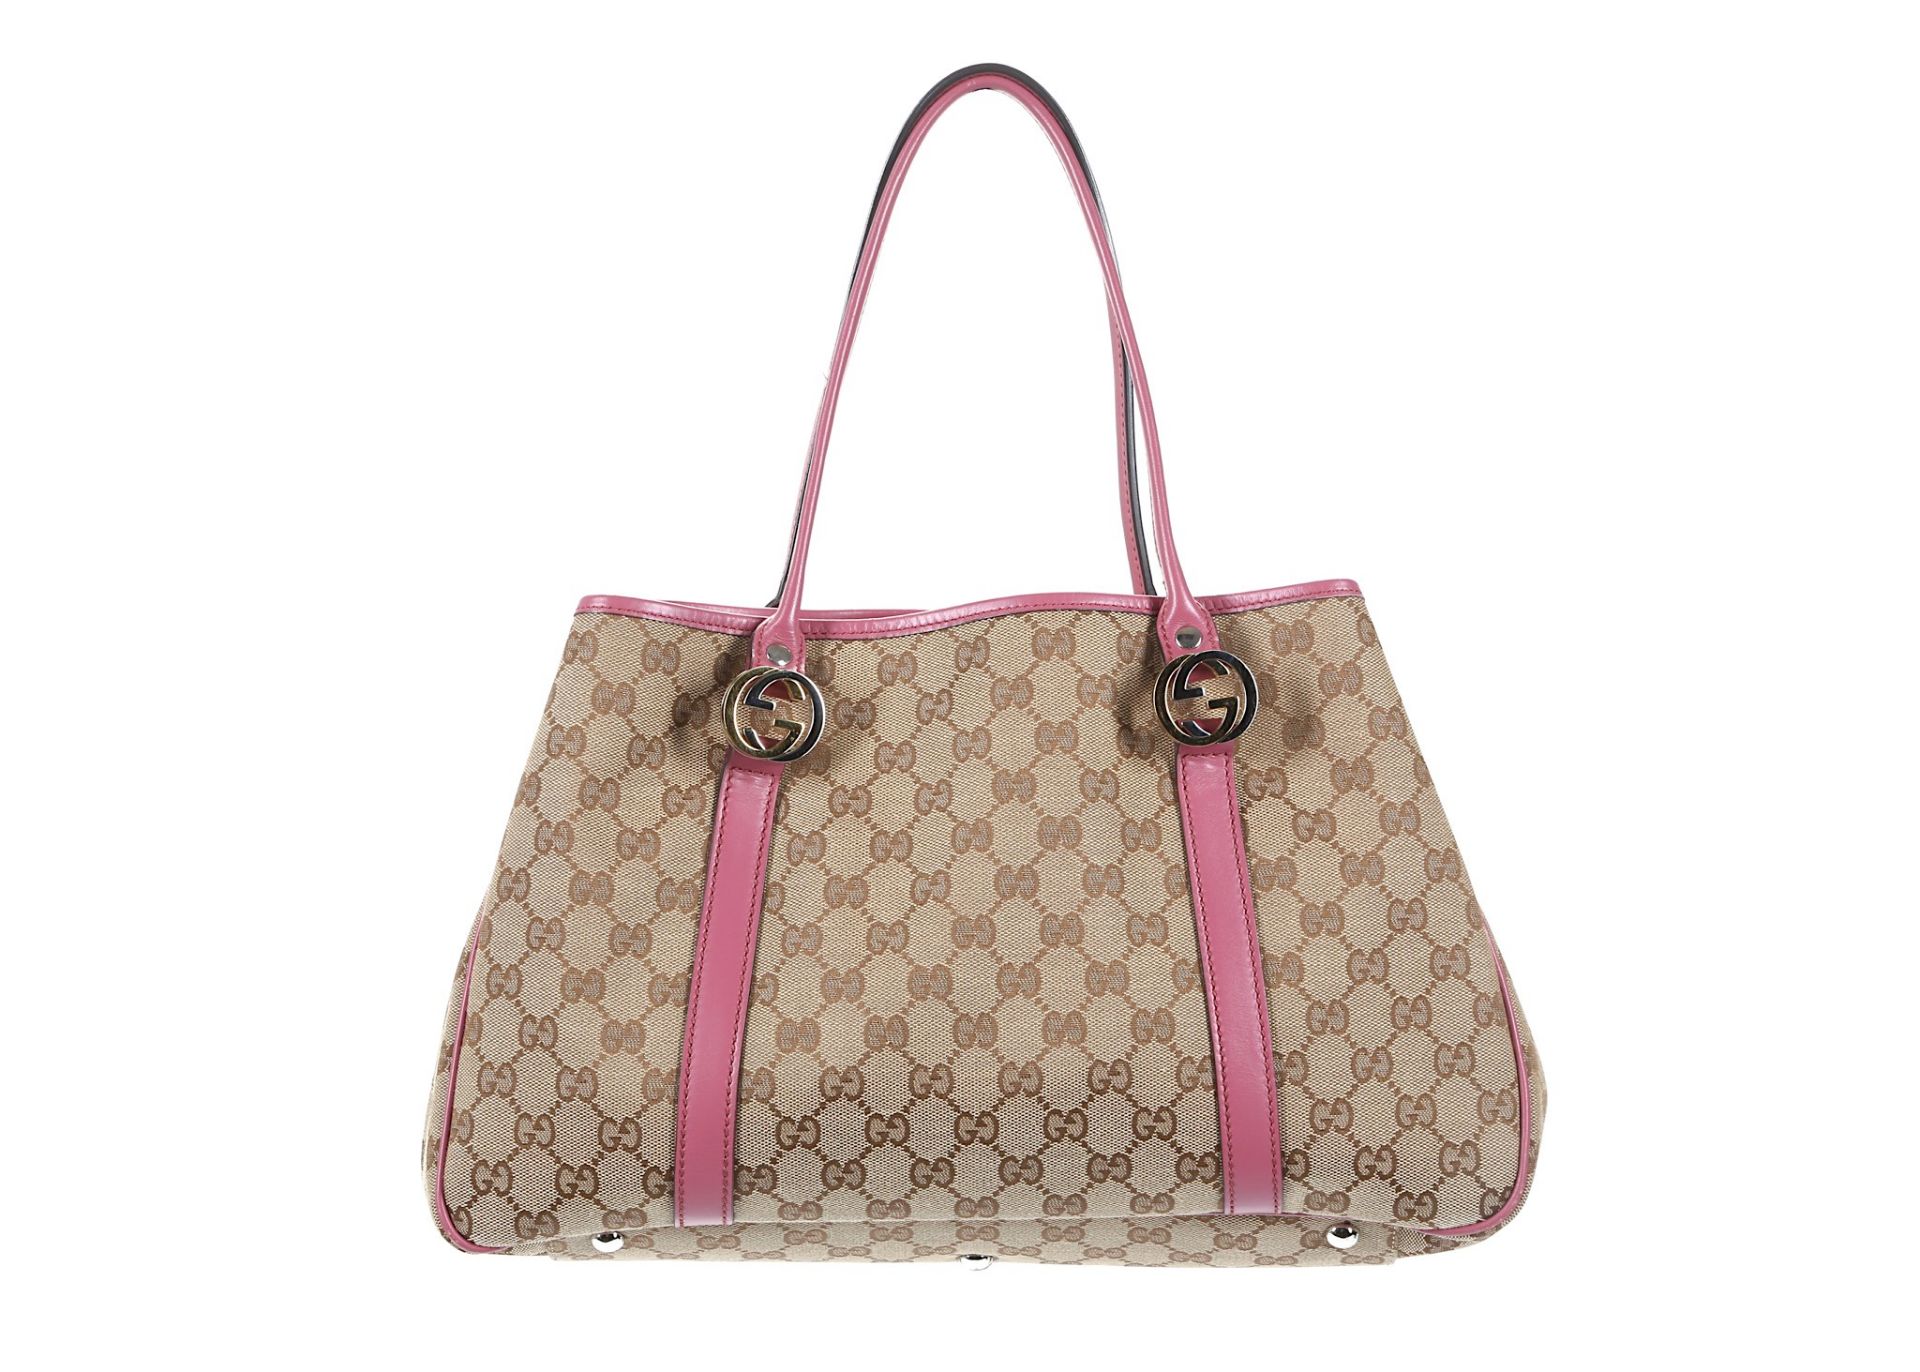 Gucci Monogram and Pink Twins Tote, brown Guccissi